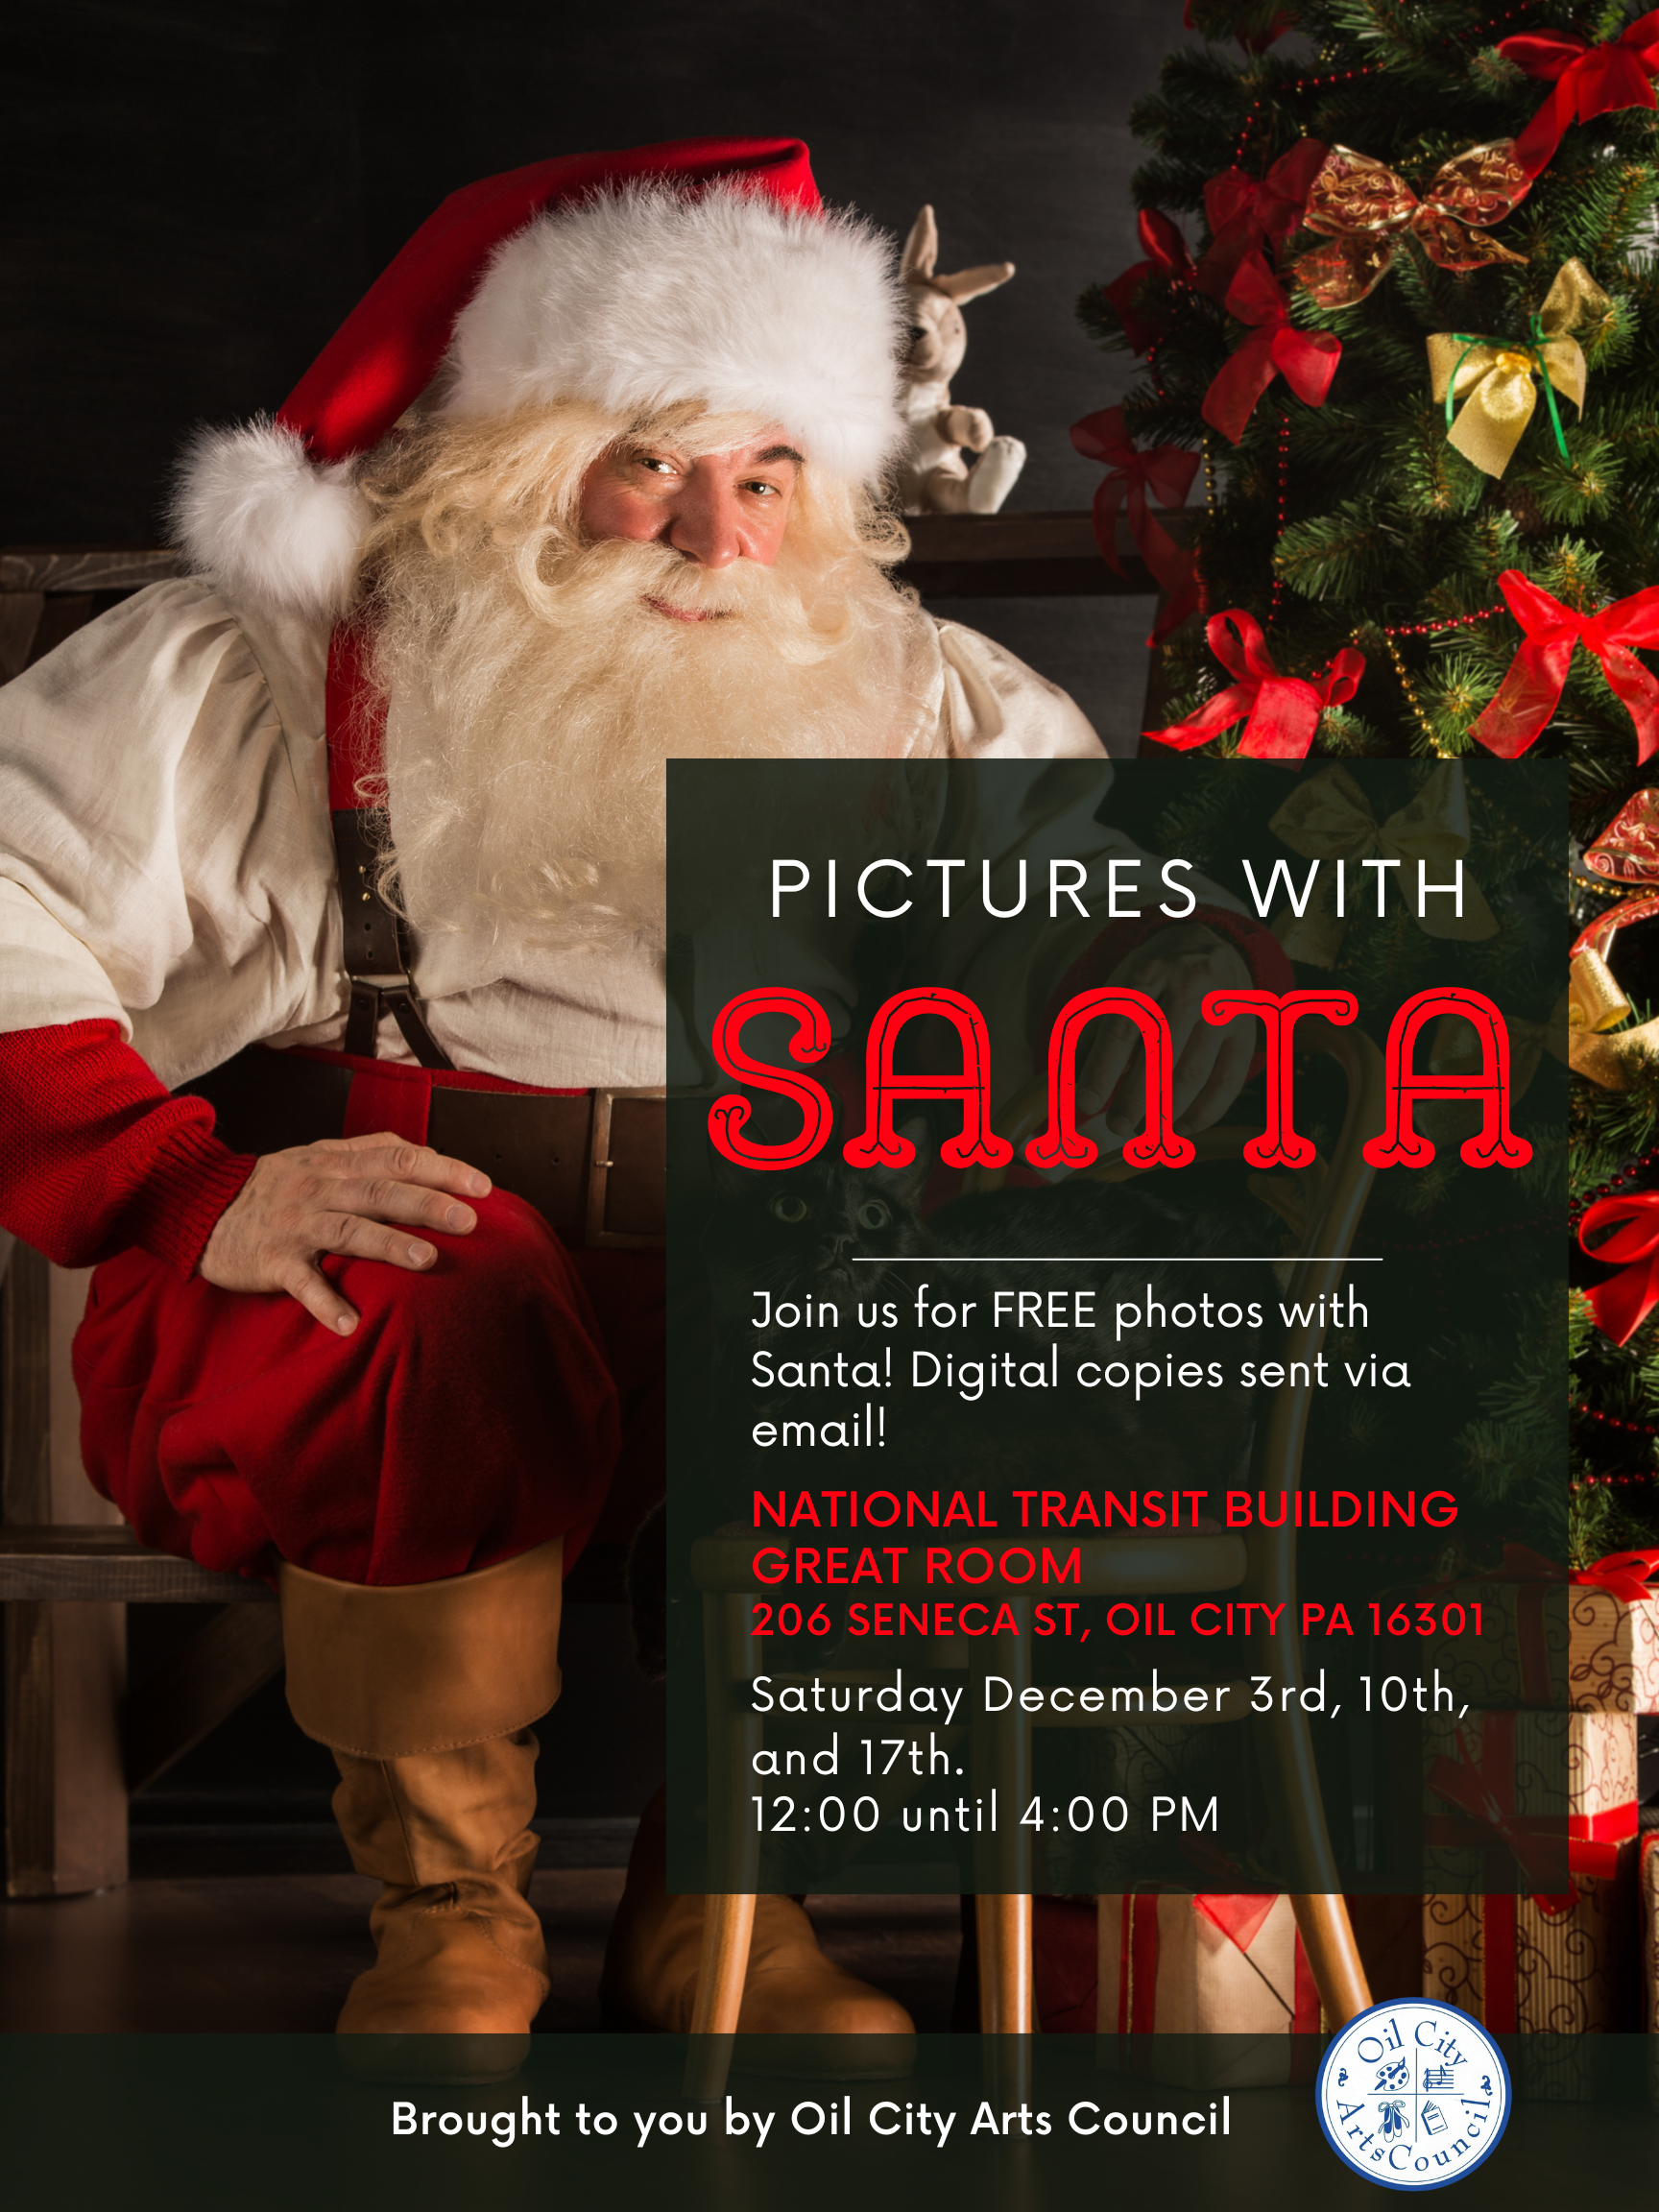 Santa will be available for pictures thanks to Oil City Arts Council!